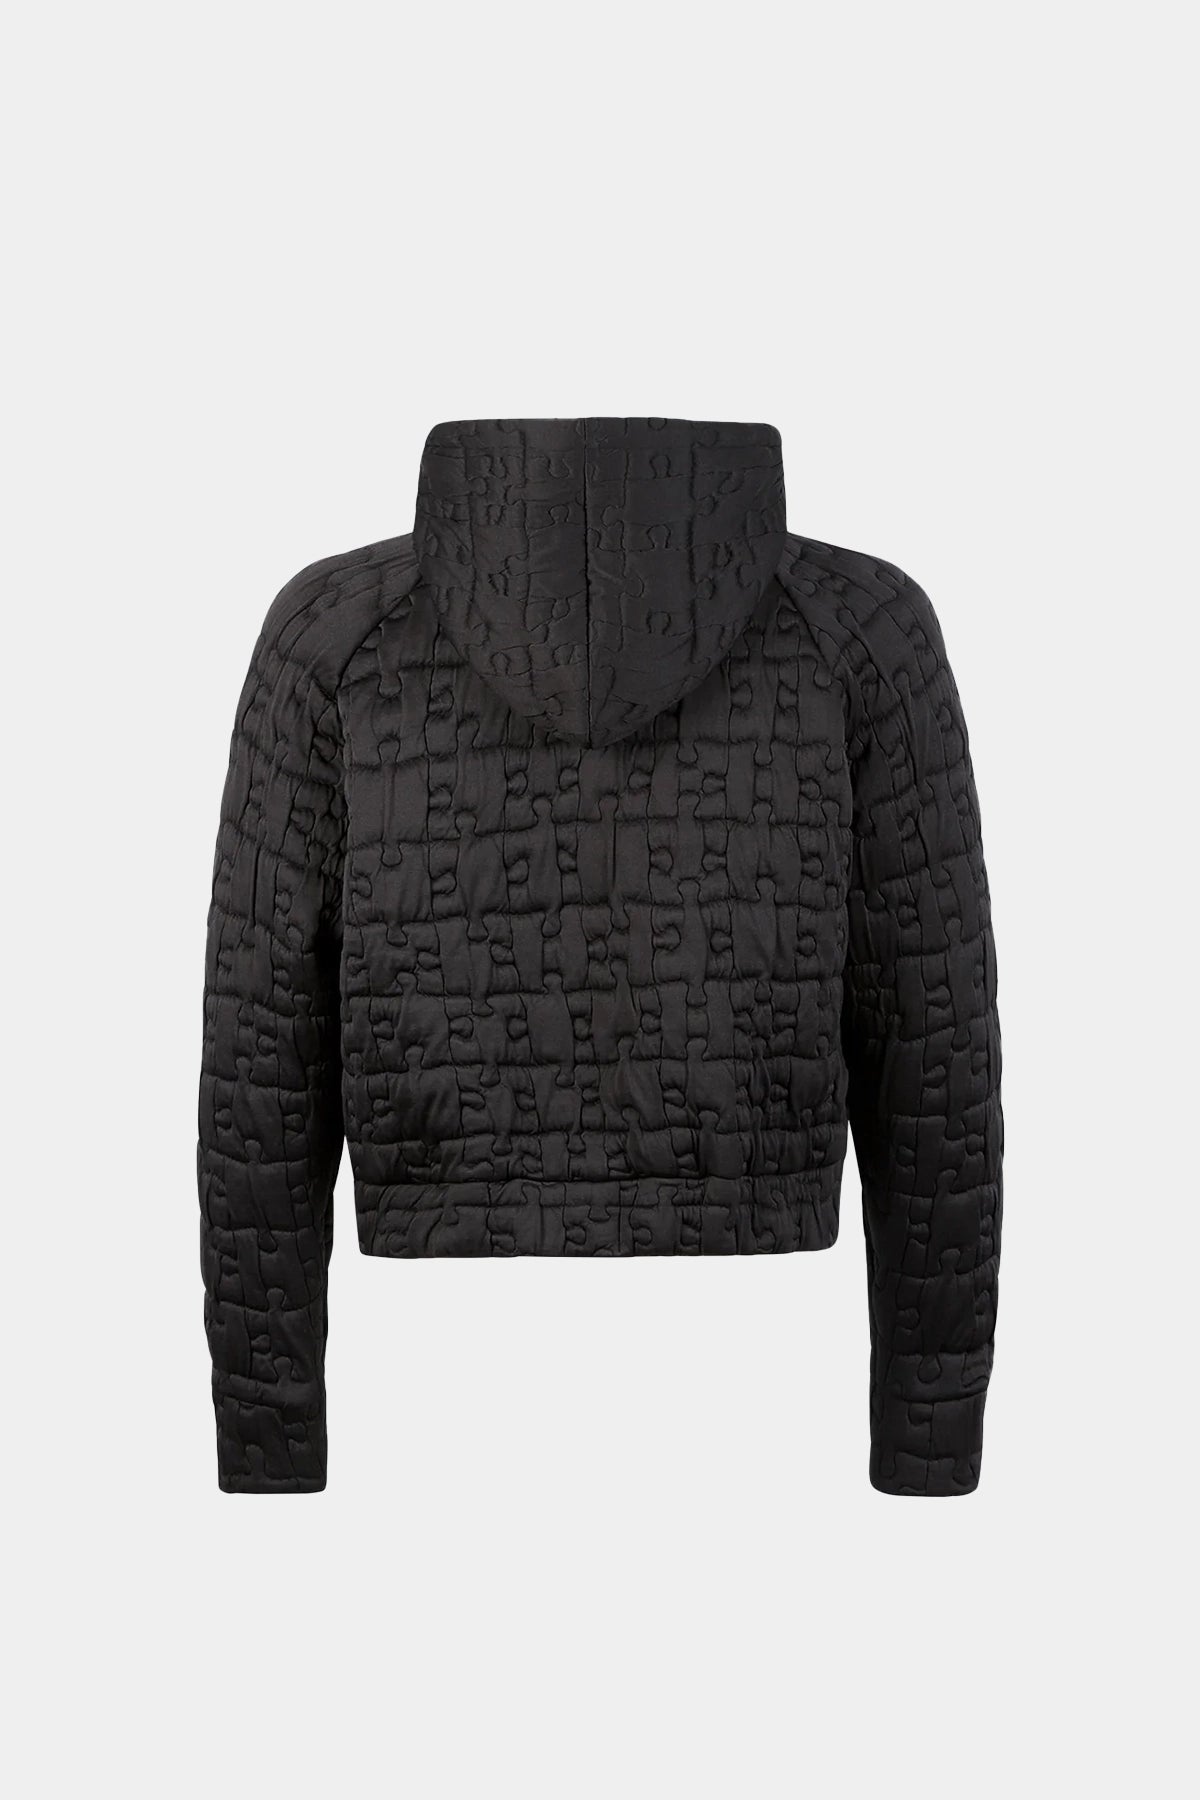 PUZZLE QUILTED HOODIE | BLACK PUZZLE